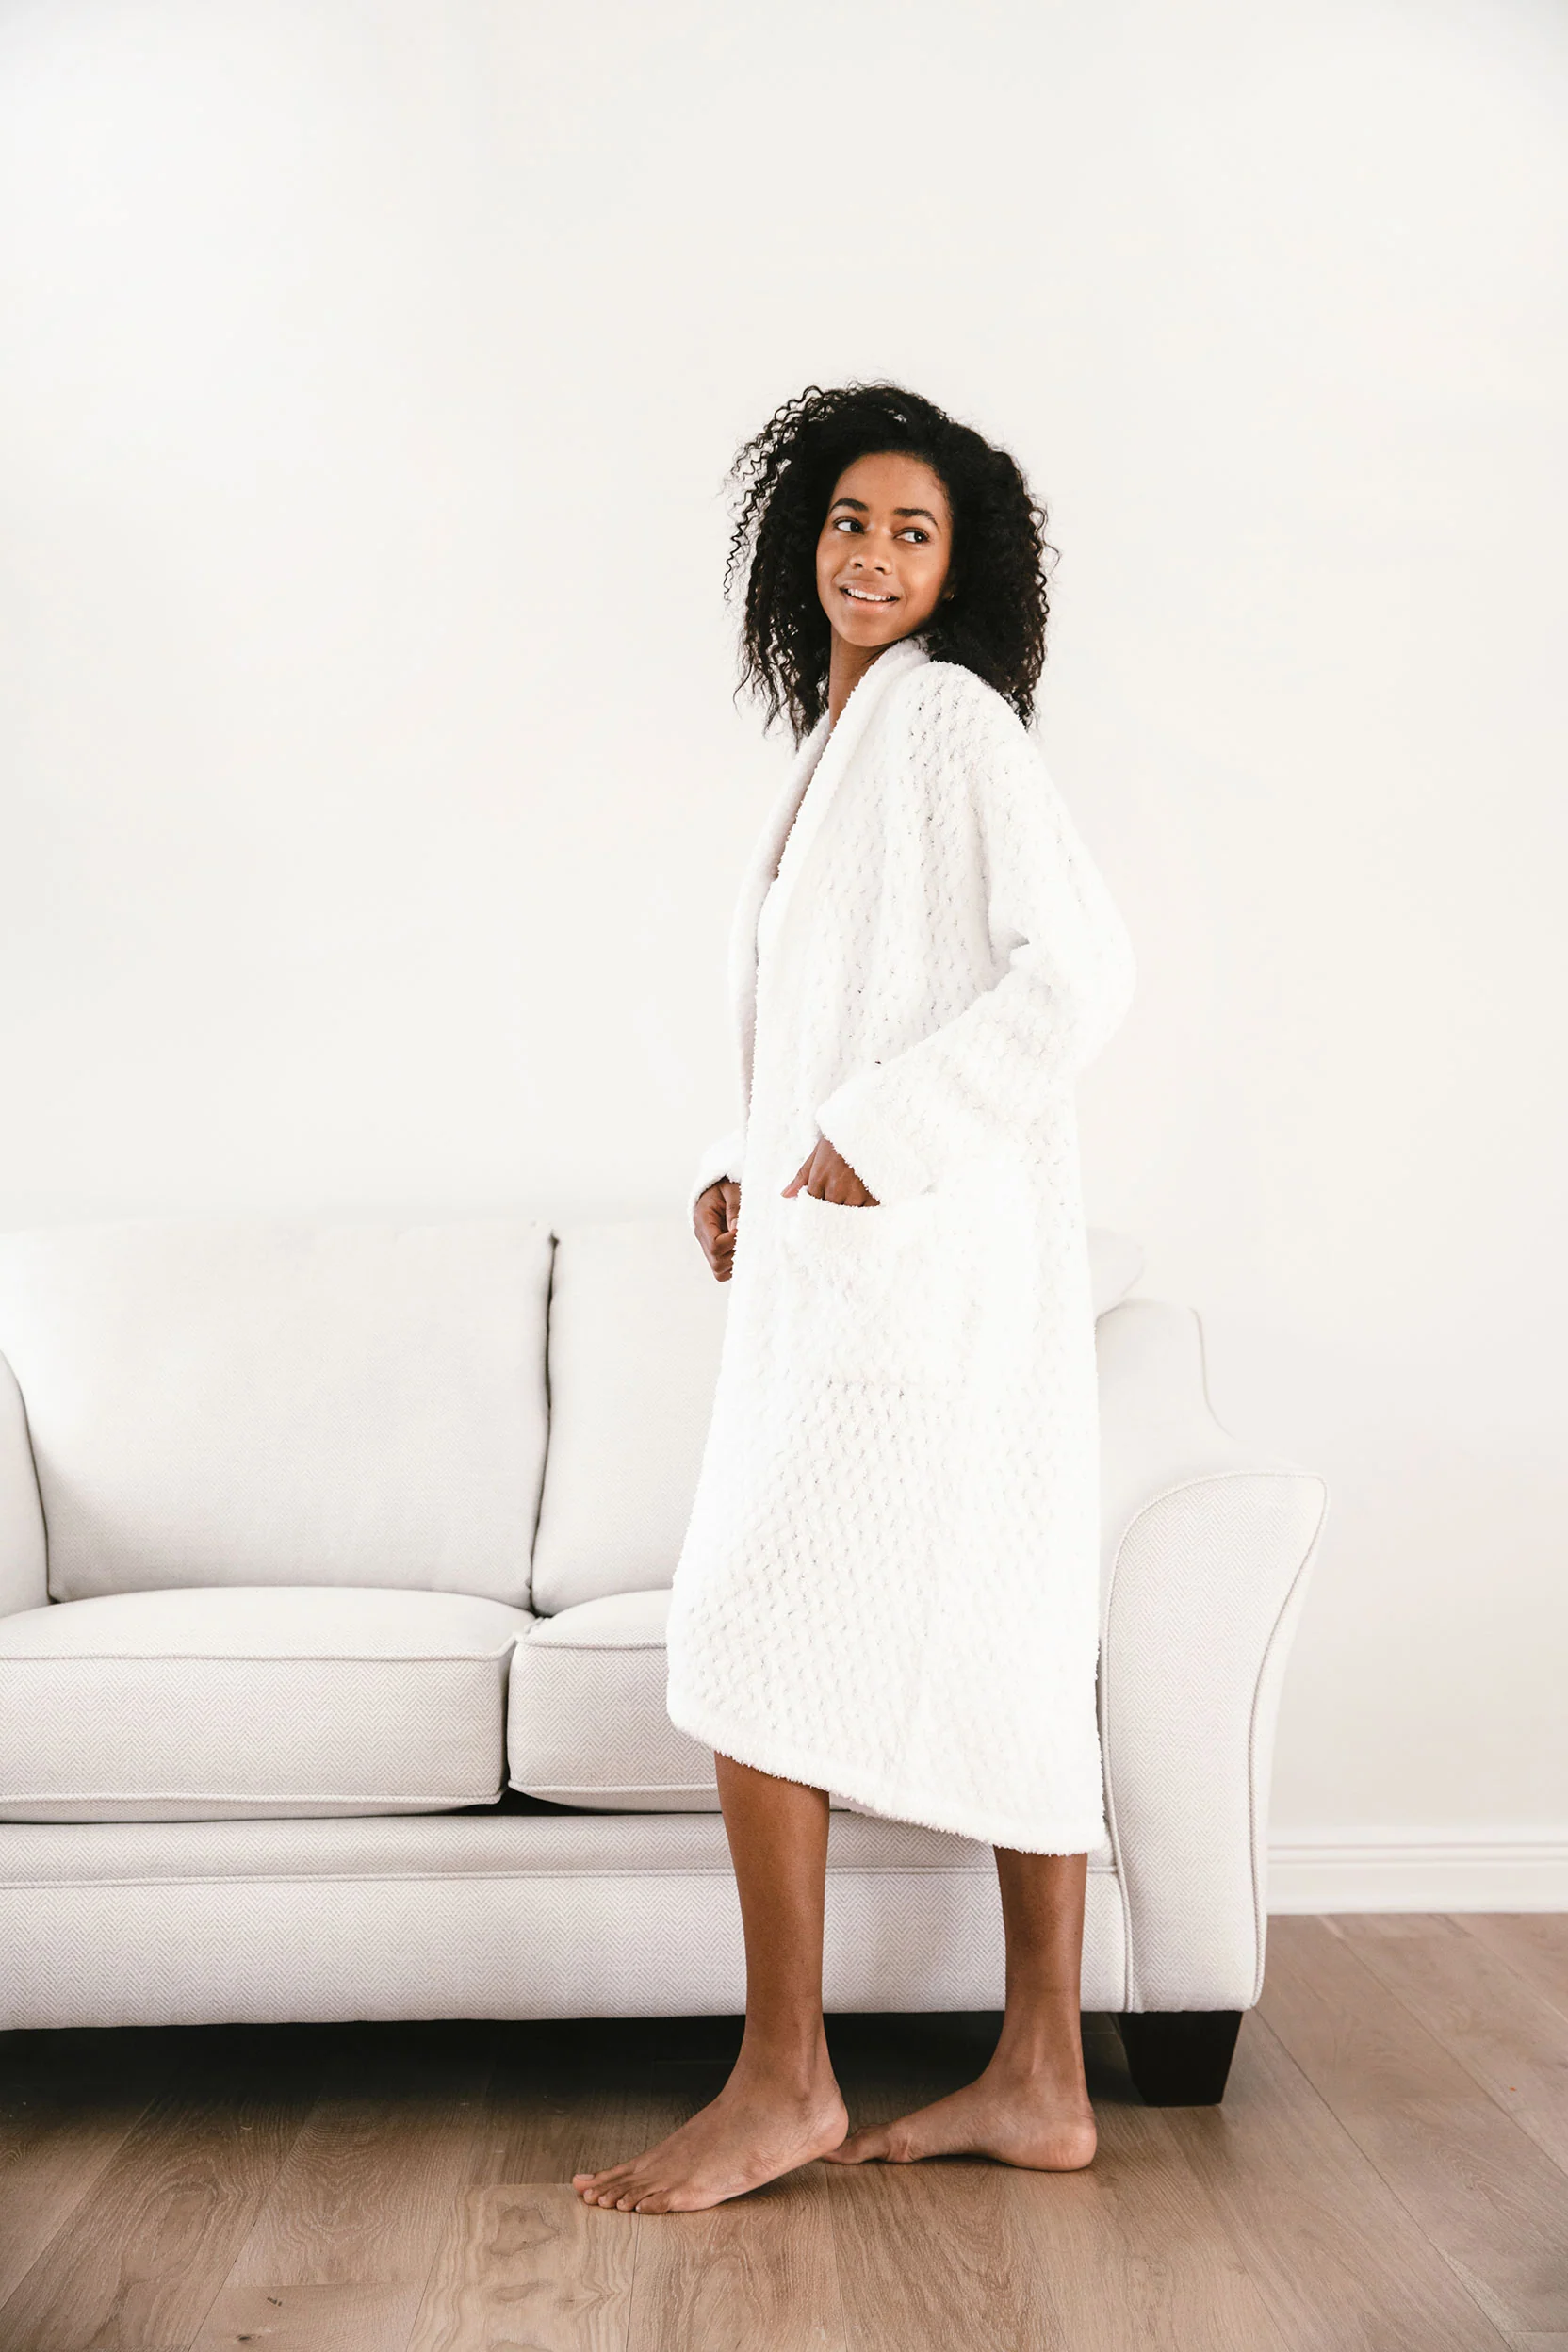 Dressing Gown Buying Guide - The Towel Shop